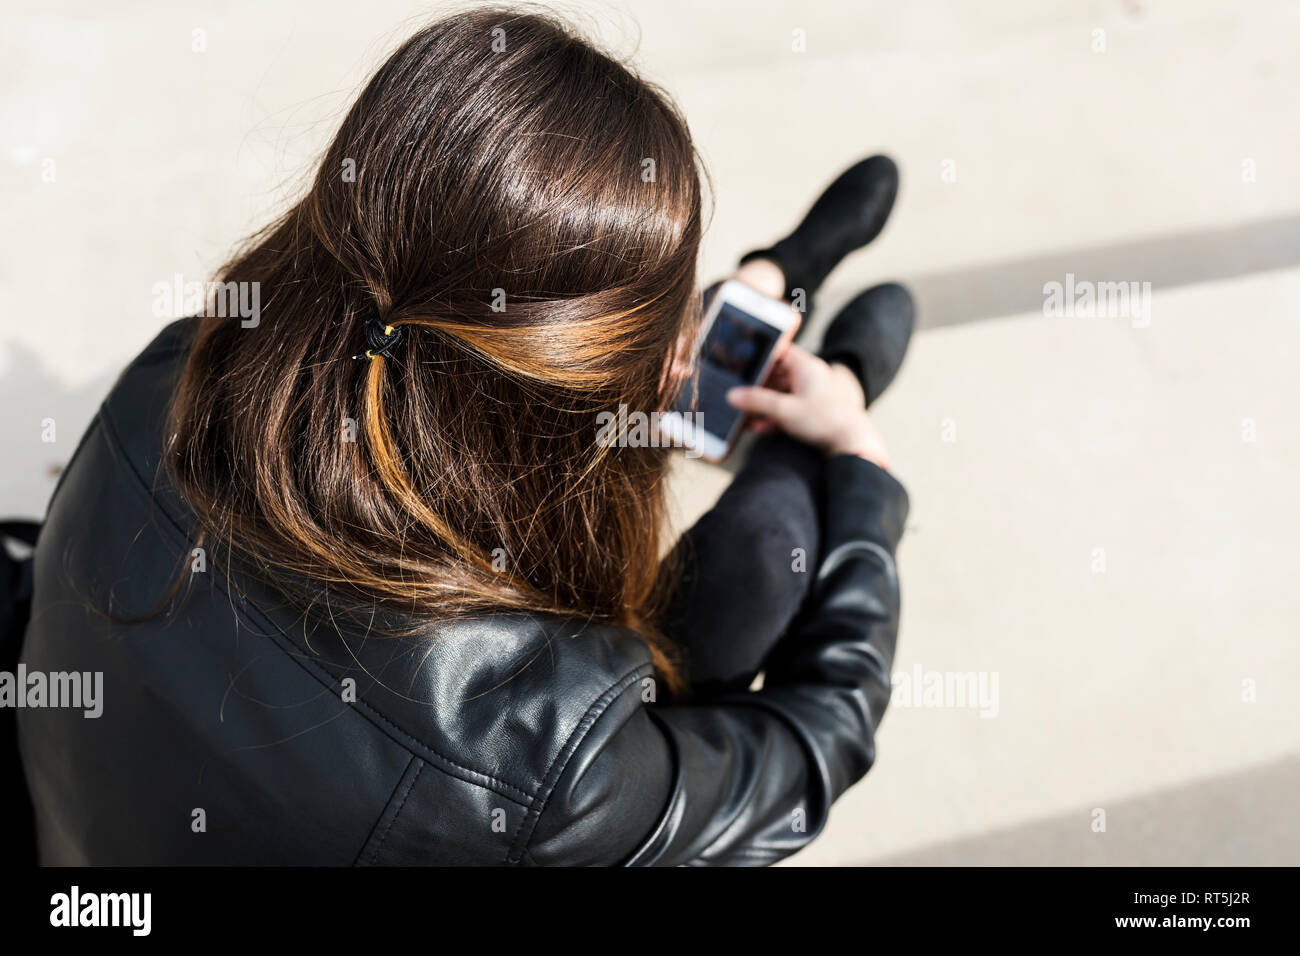 Rear view of young woman sitting outdoors using cell phone Stock Photo